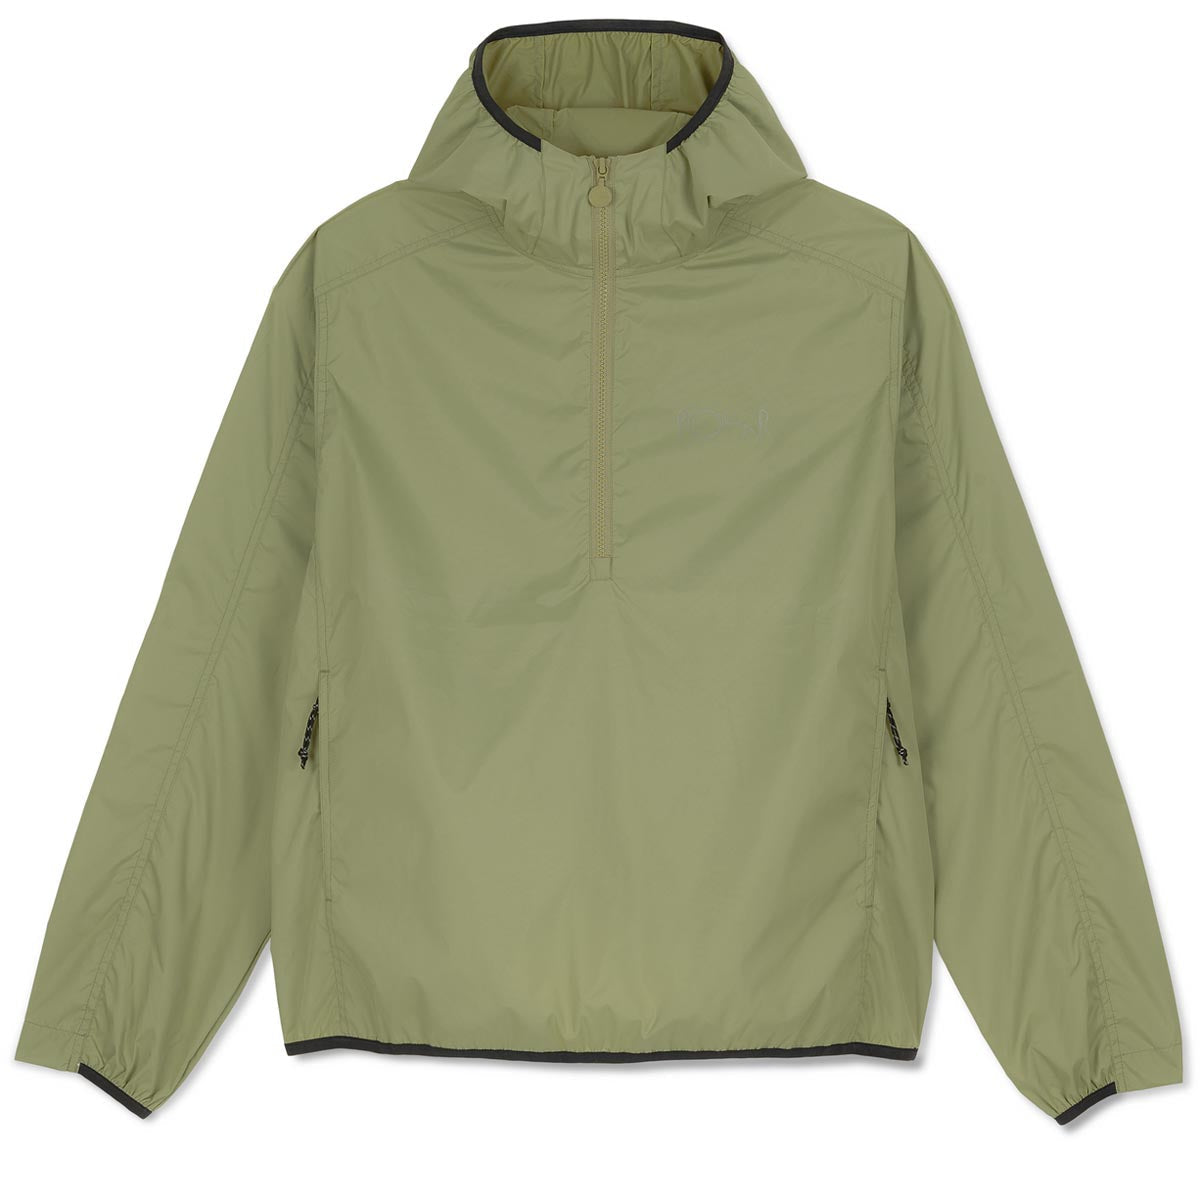 Polar Packable Anorak Jacket - Dirty Green image 1